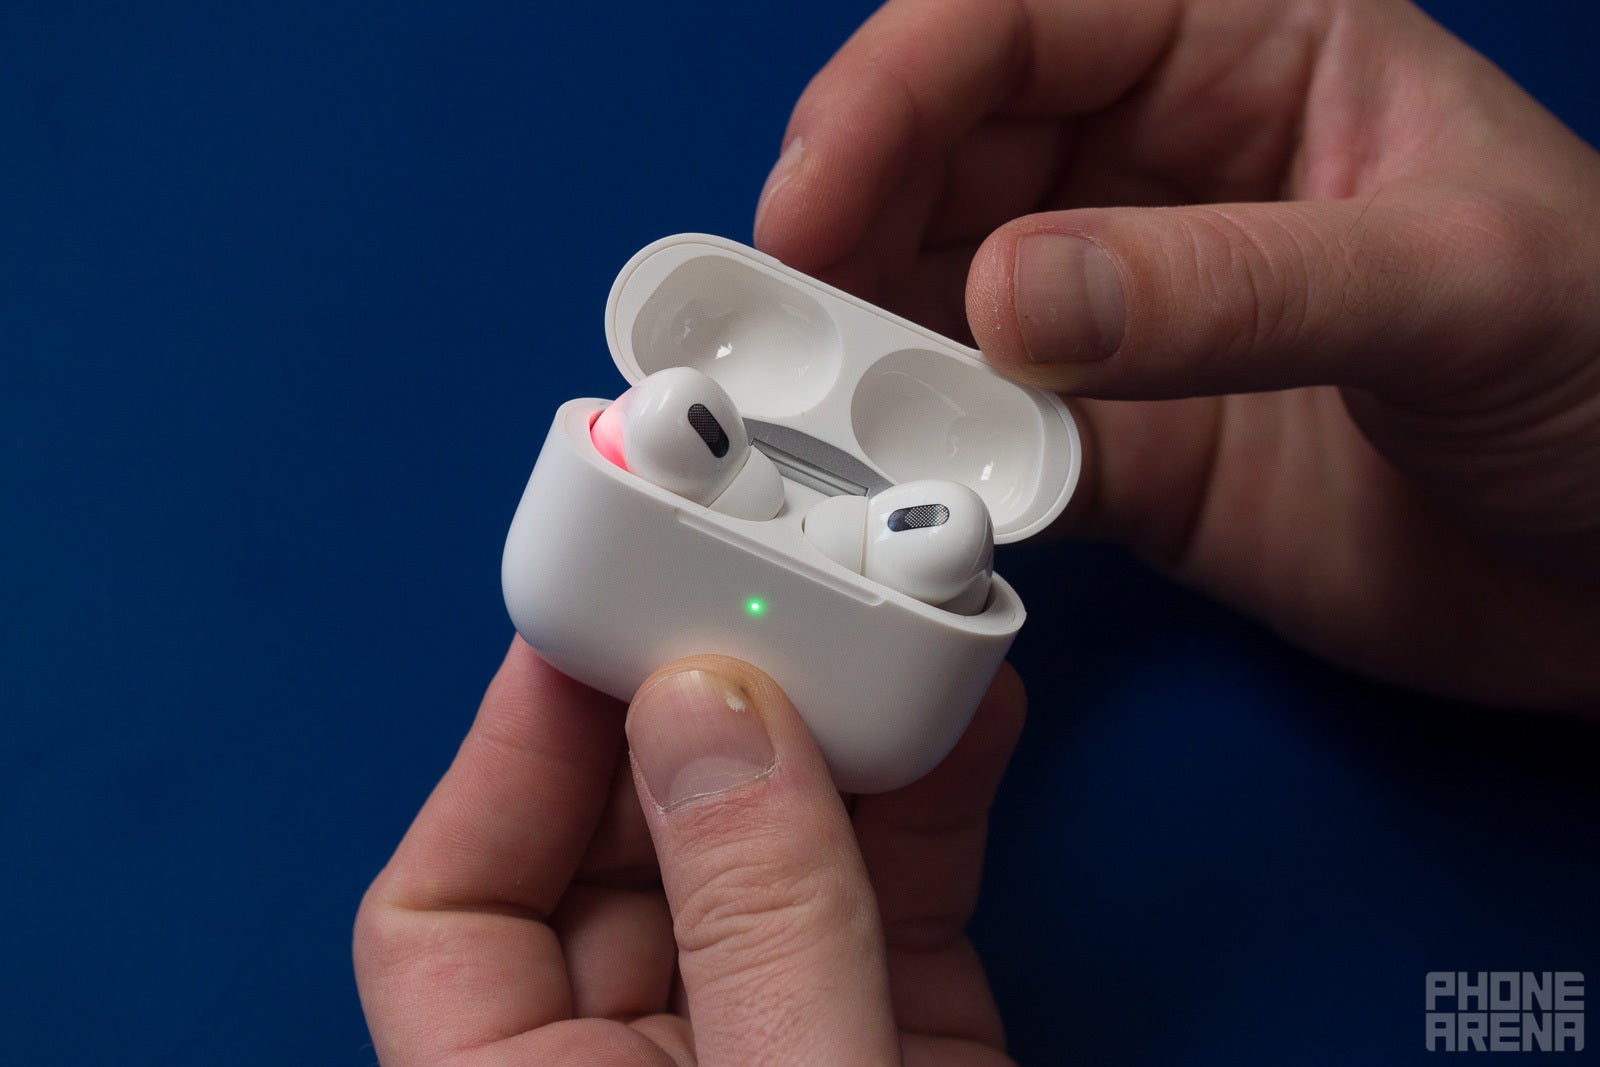 (Image credit - PhoneArena) Woop-woop, it's the sound of Don't Buy This - How to Spot Fake AirPods Pro: a complete guide